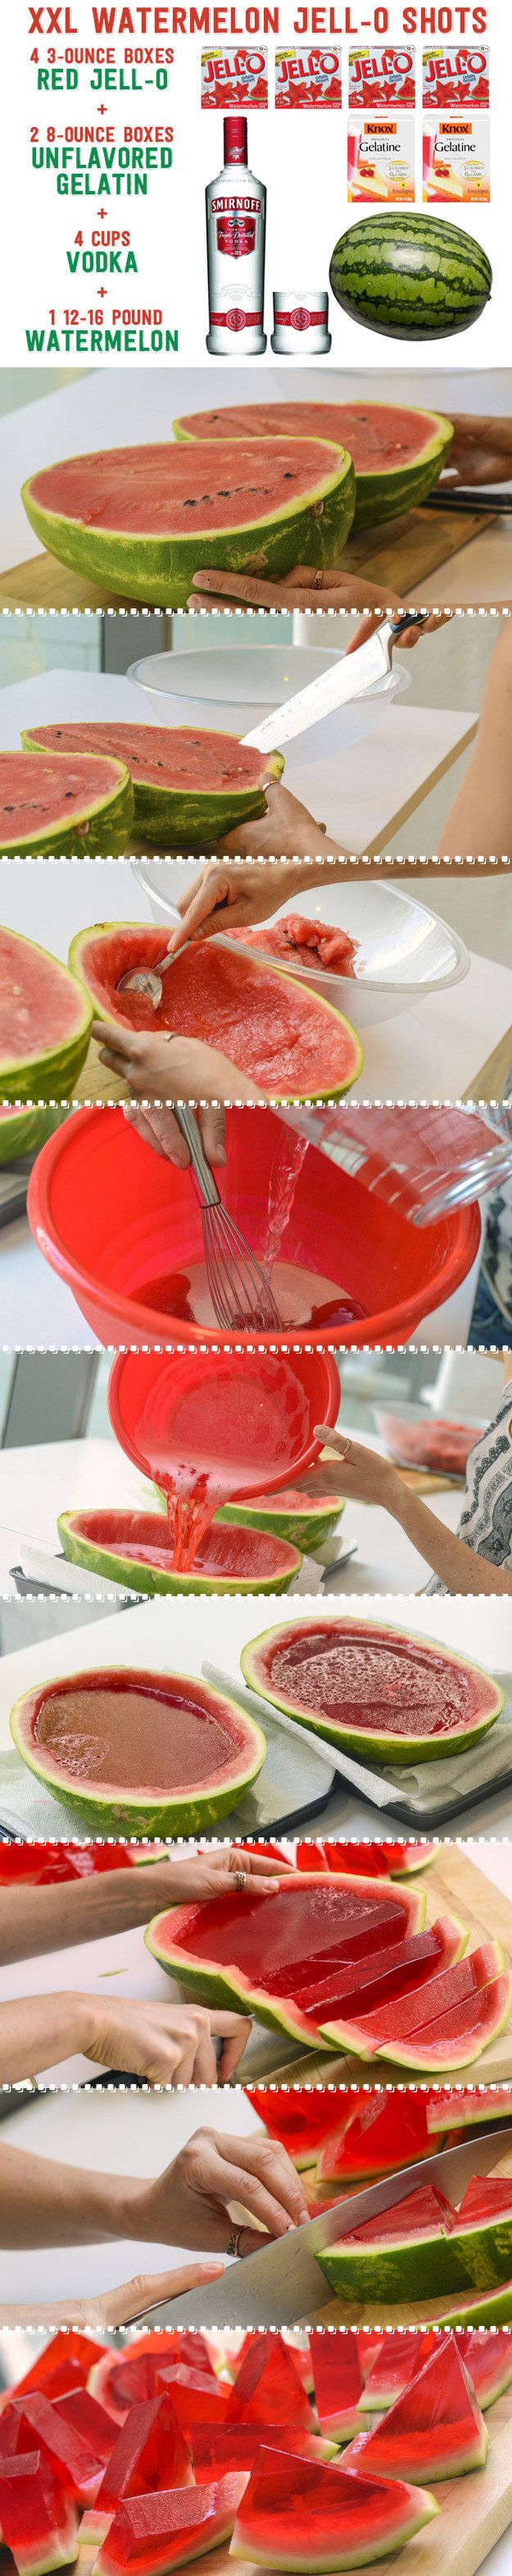 Here’s How To Make XXL Watermelon Jell-O Shots (from BuzzFeed)